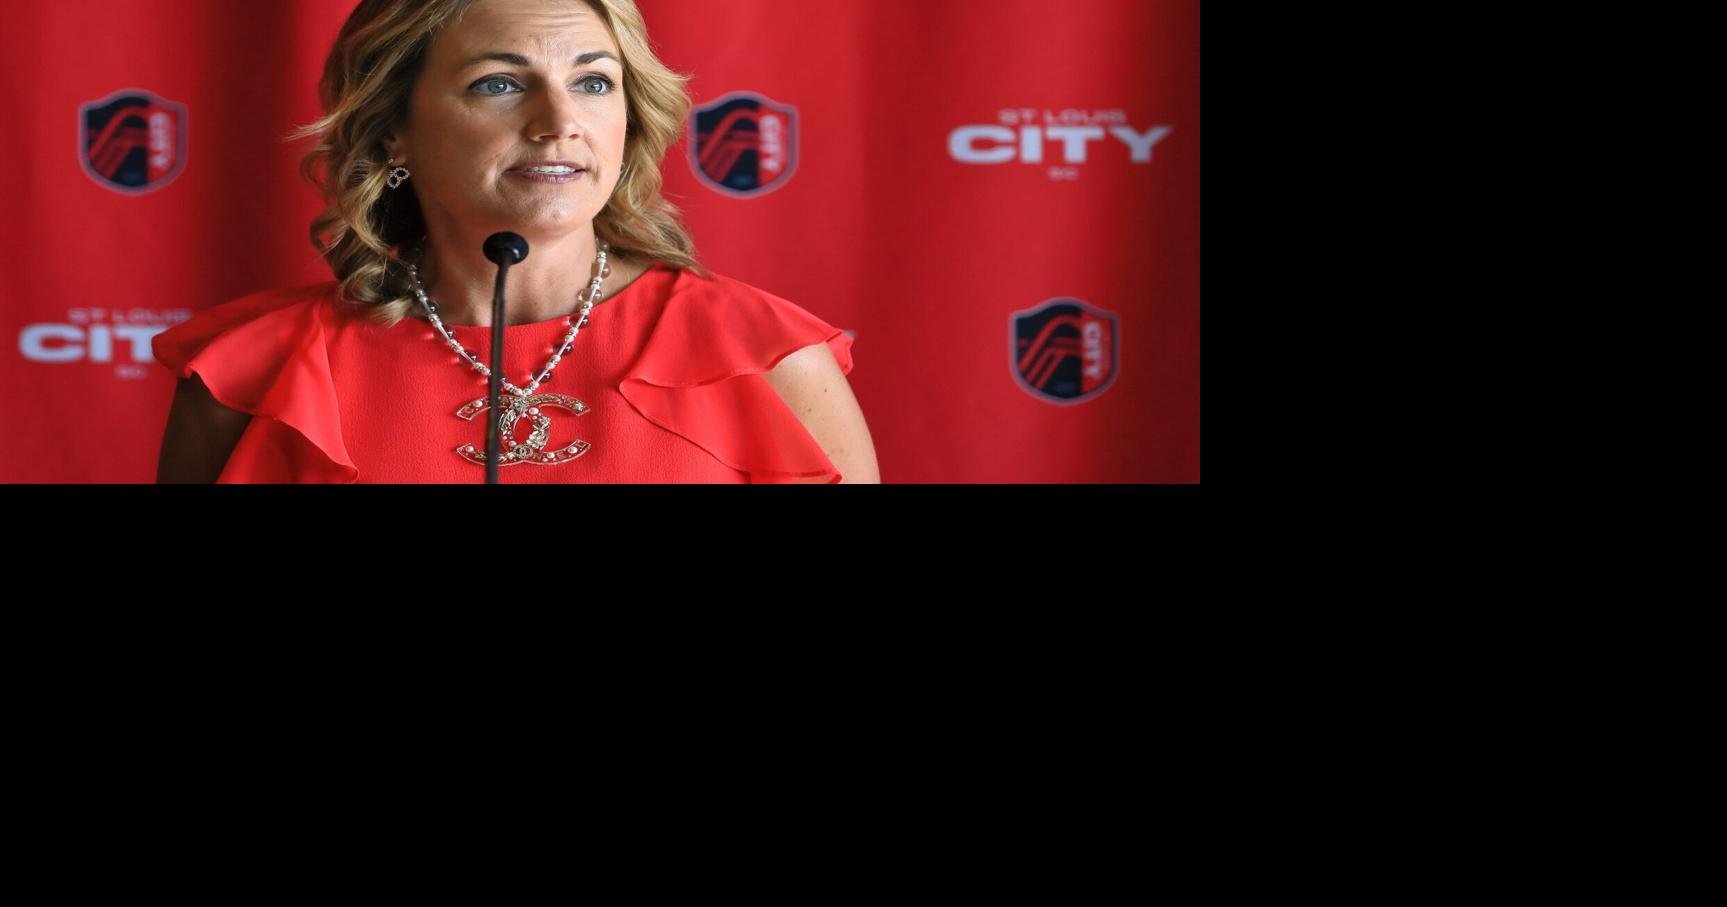 St. Louis CITY SC owner Carolyn Kindle says bumpy road helped in